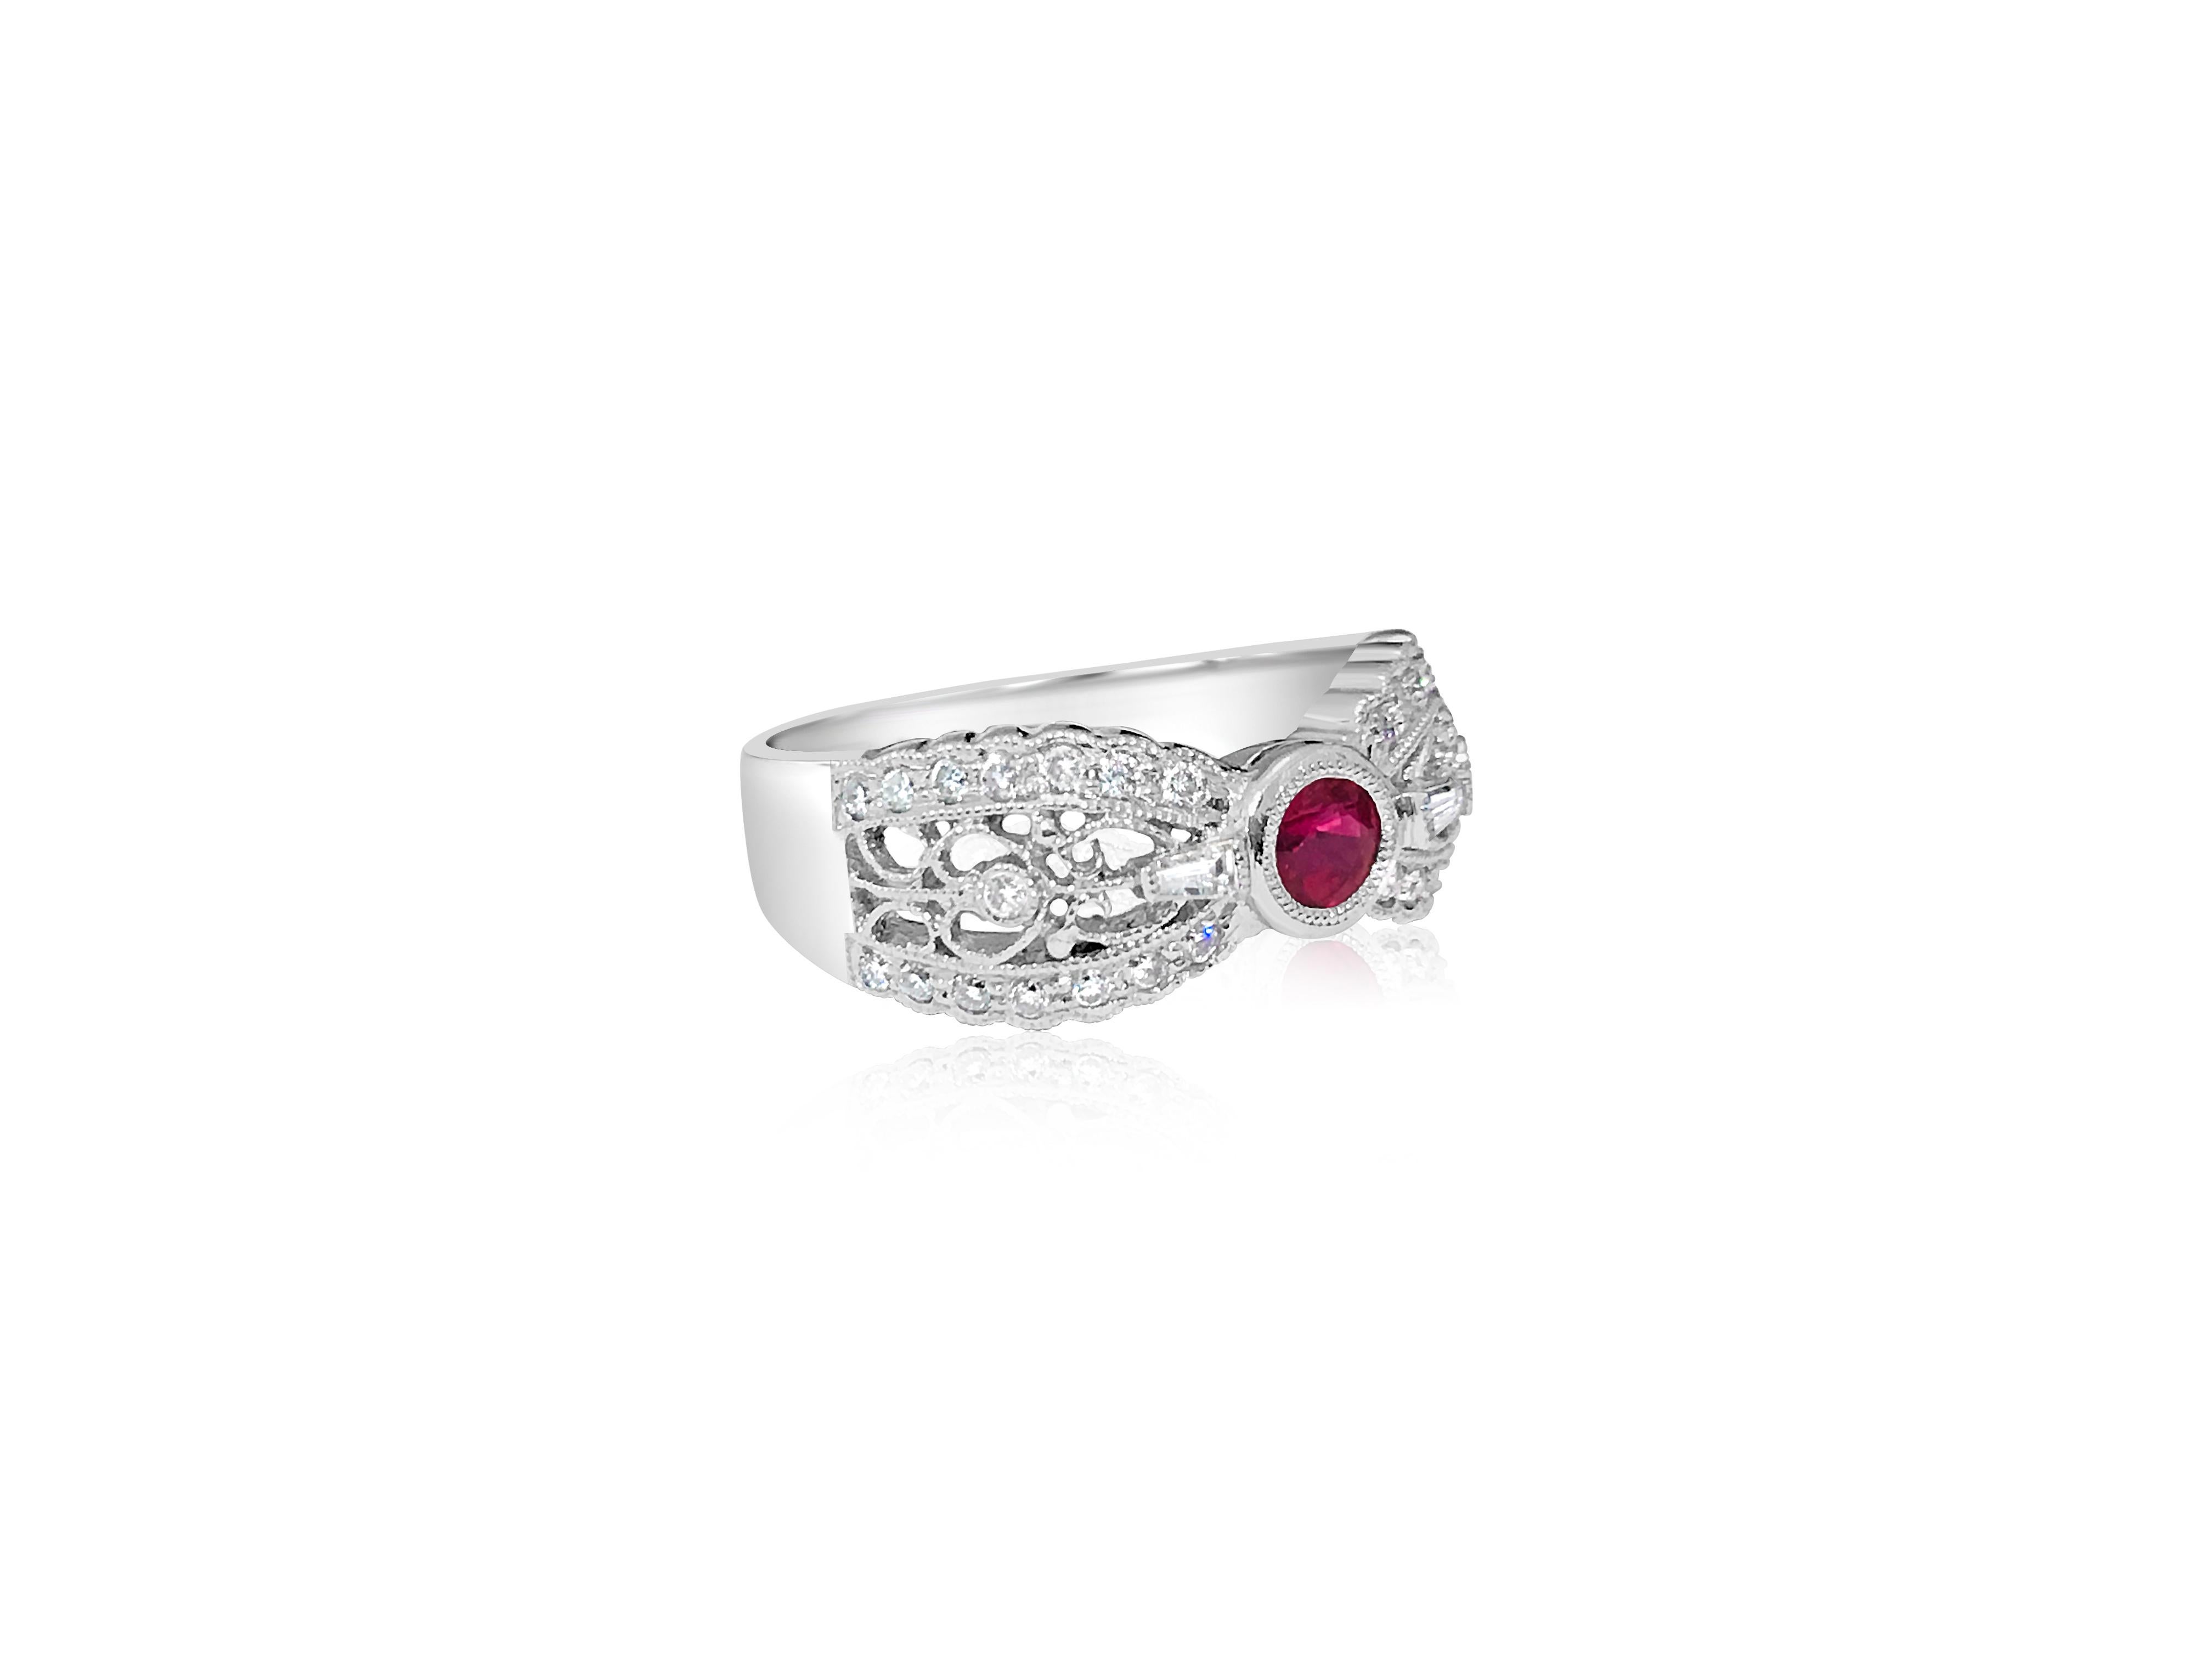 Metal: Platinum. 

No heat ruby. Natural Pigeon red ruby. 

Round Brilliant Cut (RBC) diamonds, VS clarity and F-G color. 

All precious stones are high quality and perfectly cut. 

Excellent ladies ruby and diamond engagement ring 